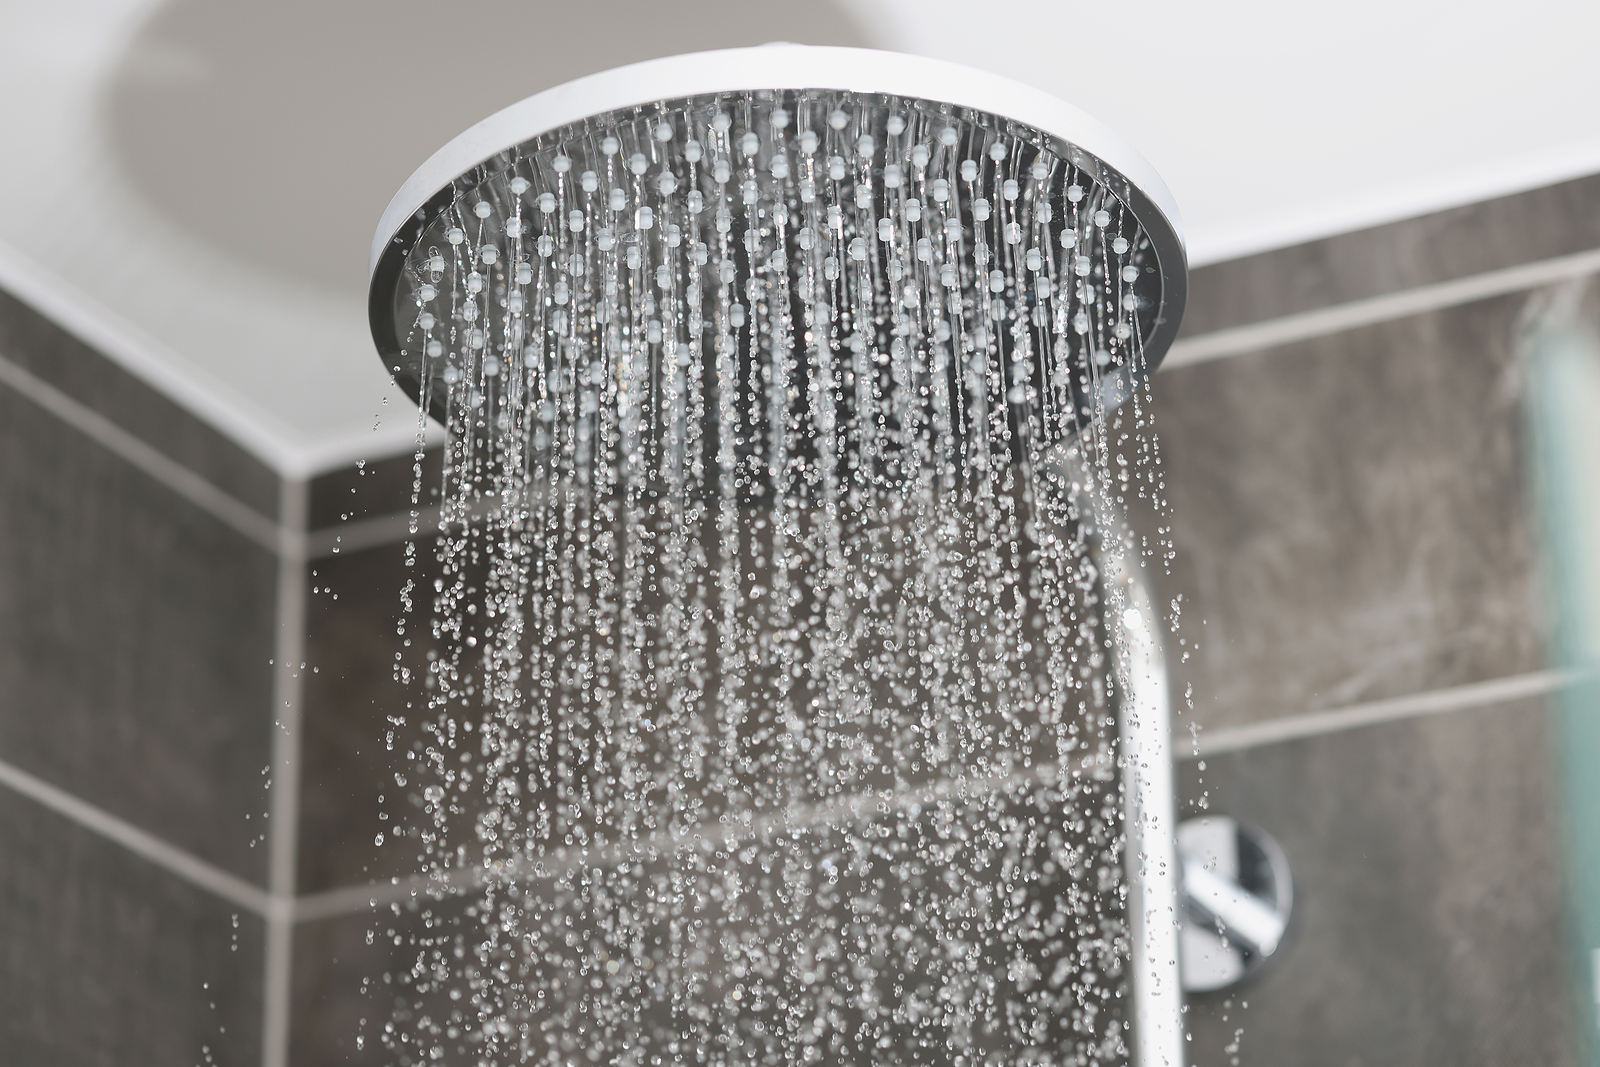 Drainage Systems, Sink and Shower Drains